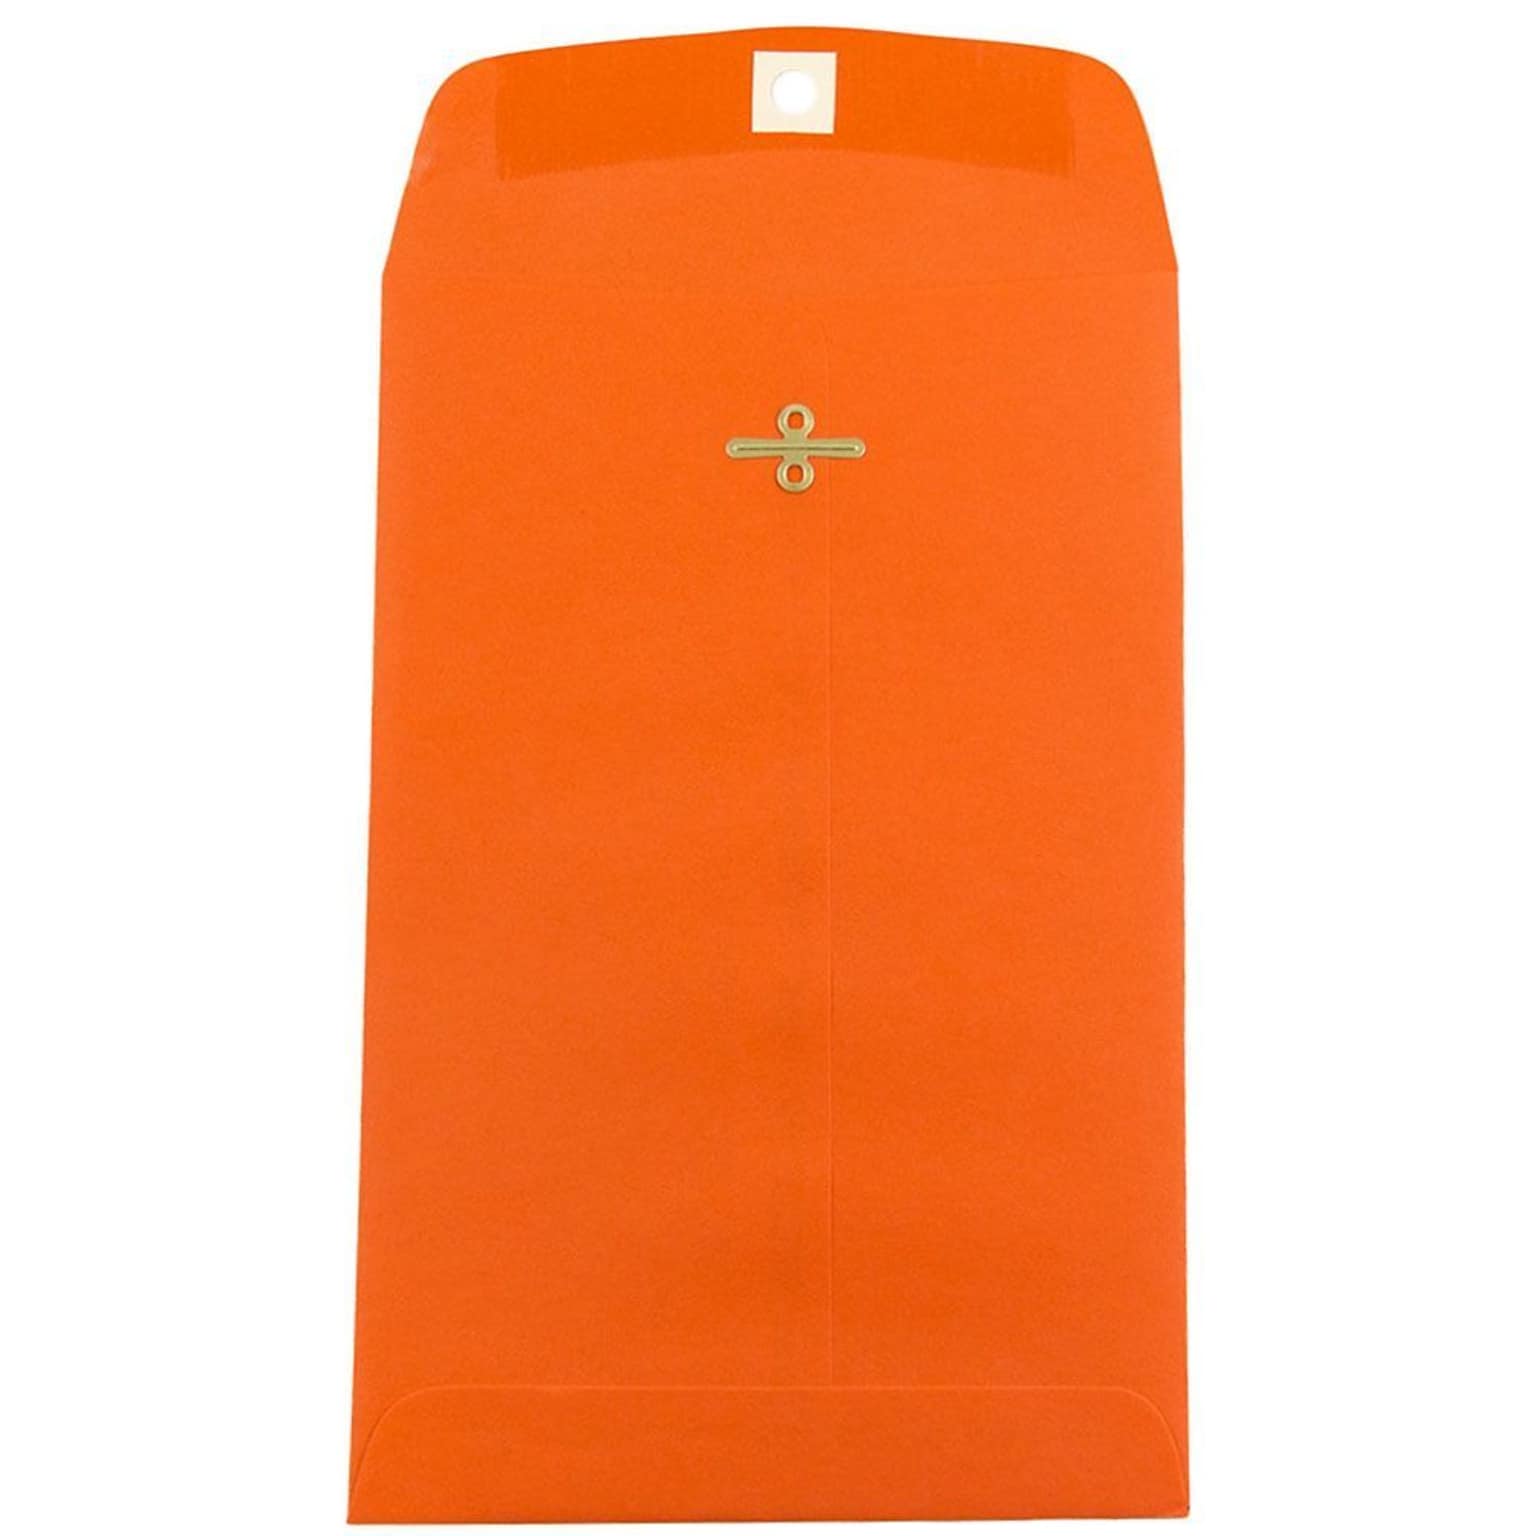 JAM Paper® 6 x 9 Open End Catalog Colored Envelopes with Clasp Closure, Orange Recycled, 10/Pack (V0128127B)